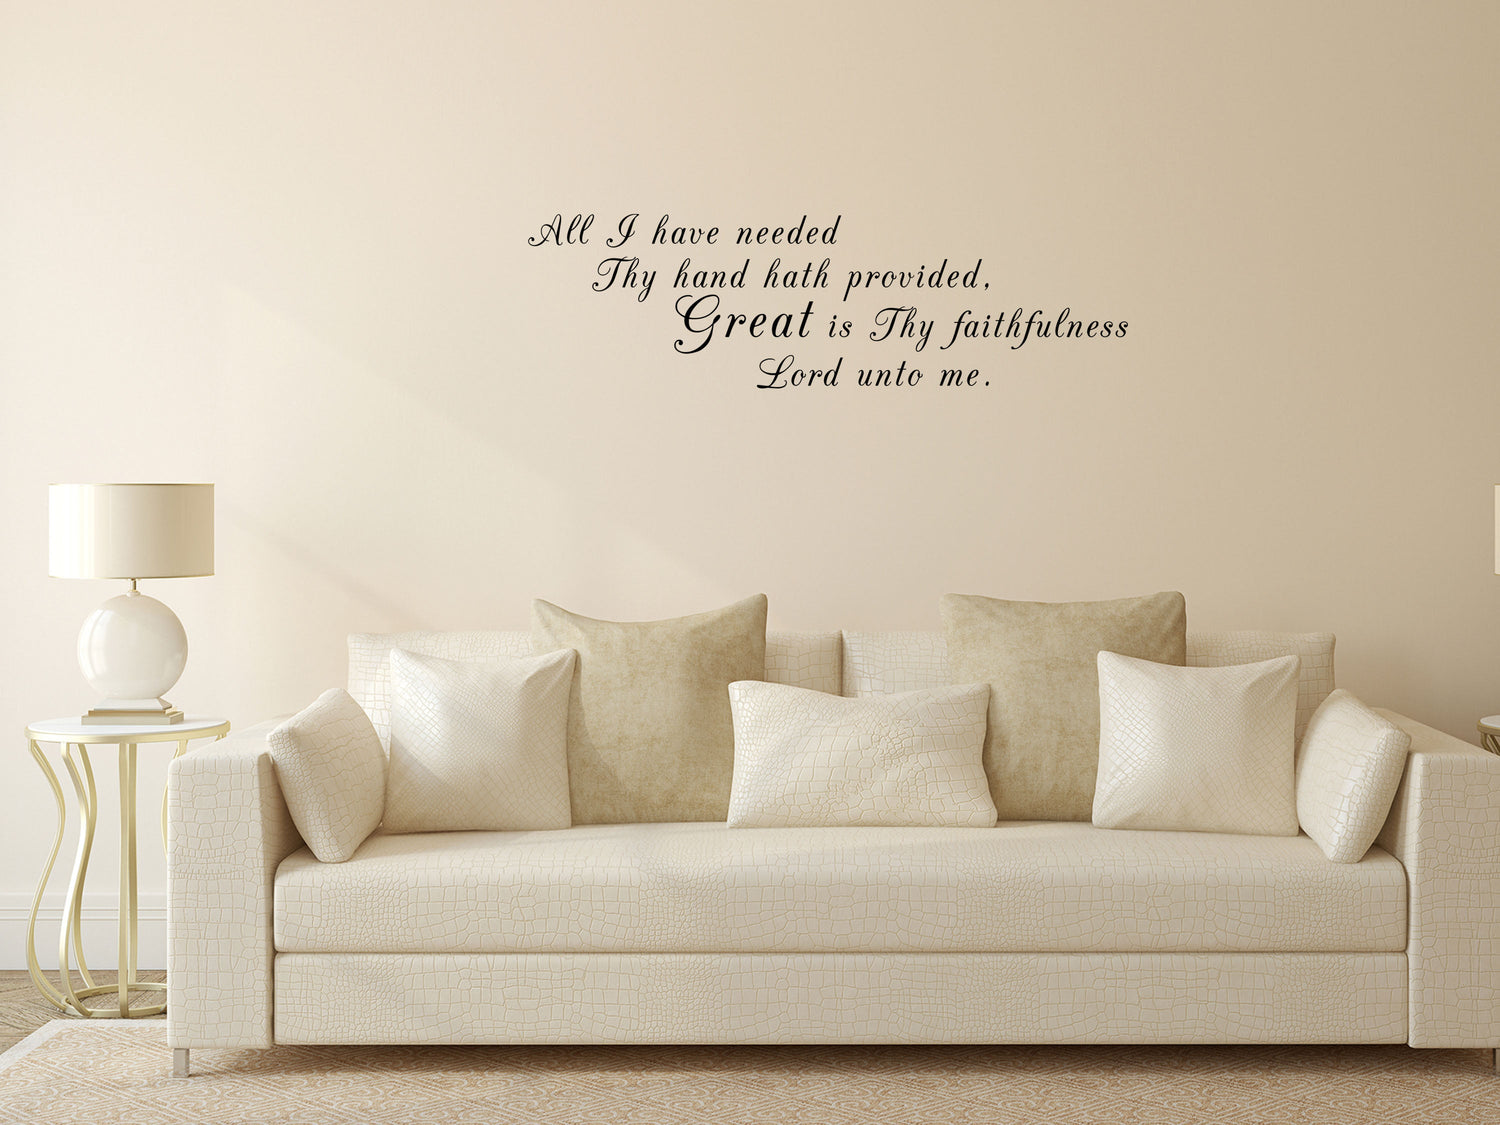 Great Is Thy Faithfulness - Hymn Decal Vinyl Wall Decal Title Done 